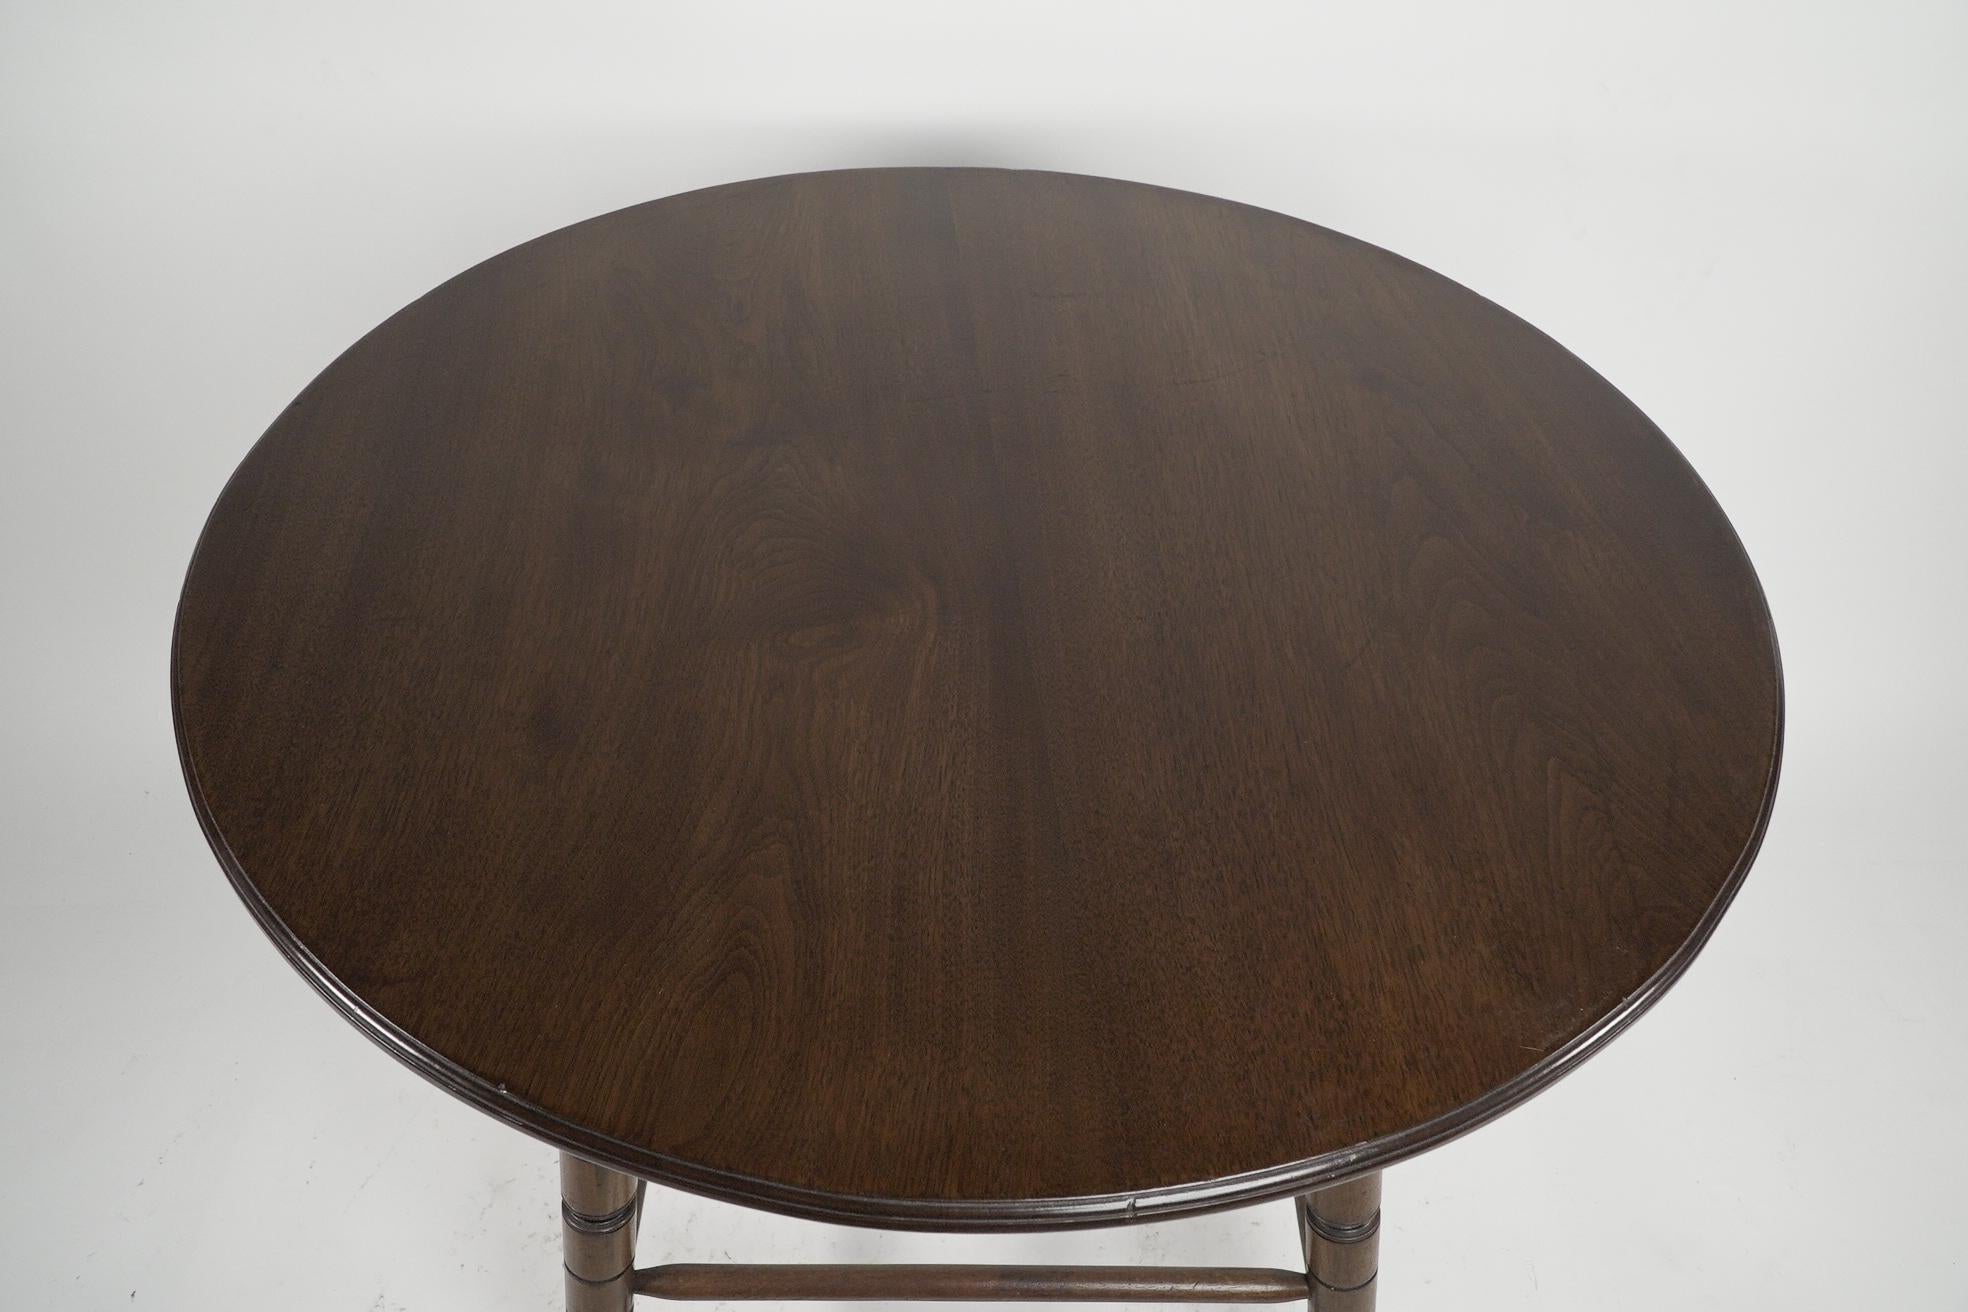 Aesthetic Movement Walnut centre table with incised circular details to the legs In Good Condition For Sale In London, GB